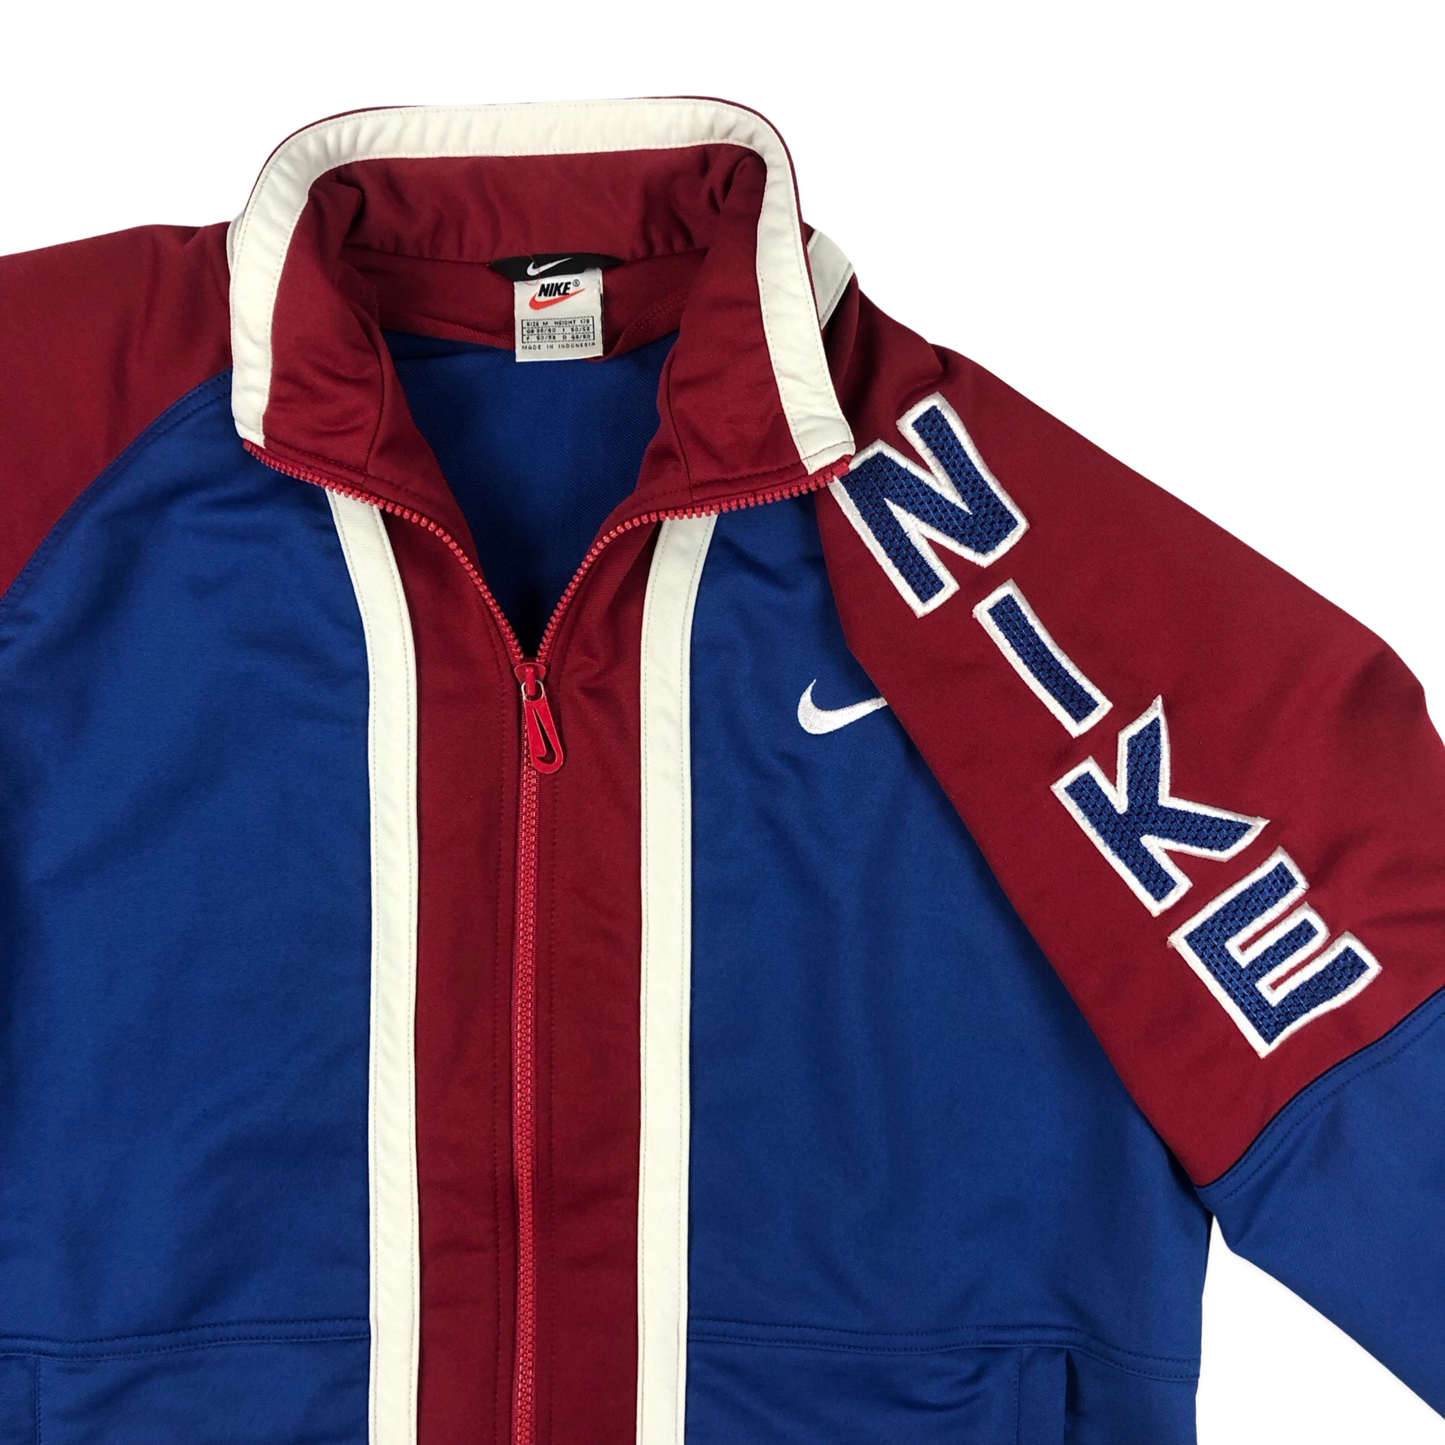 Vintage 90s Nike Red and Blue Zip-up Track Jacket XL